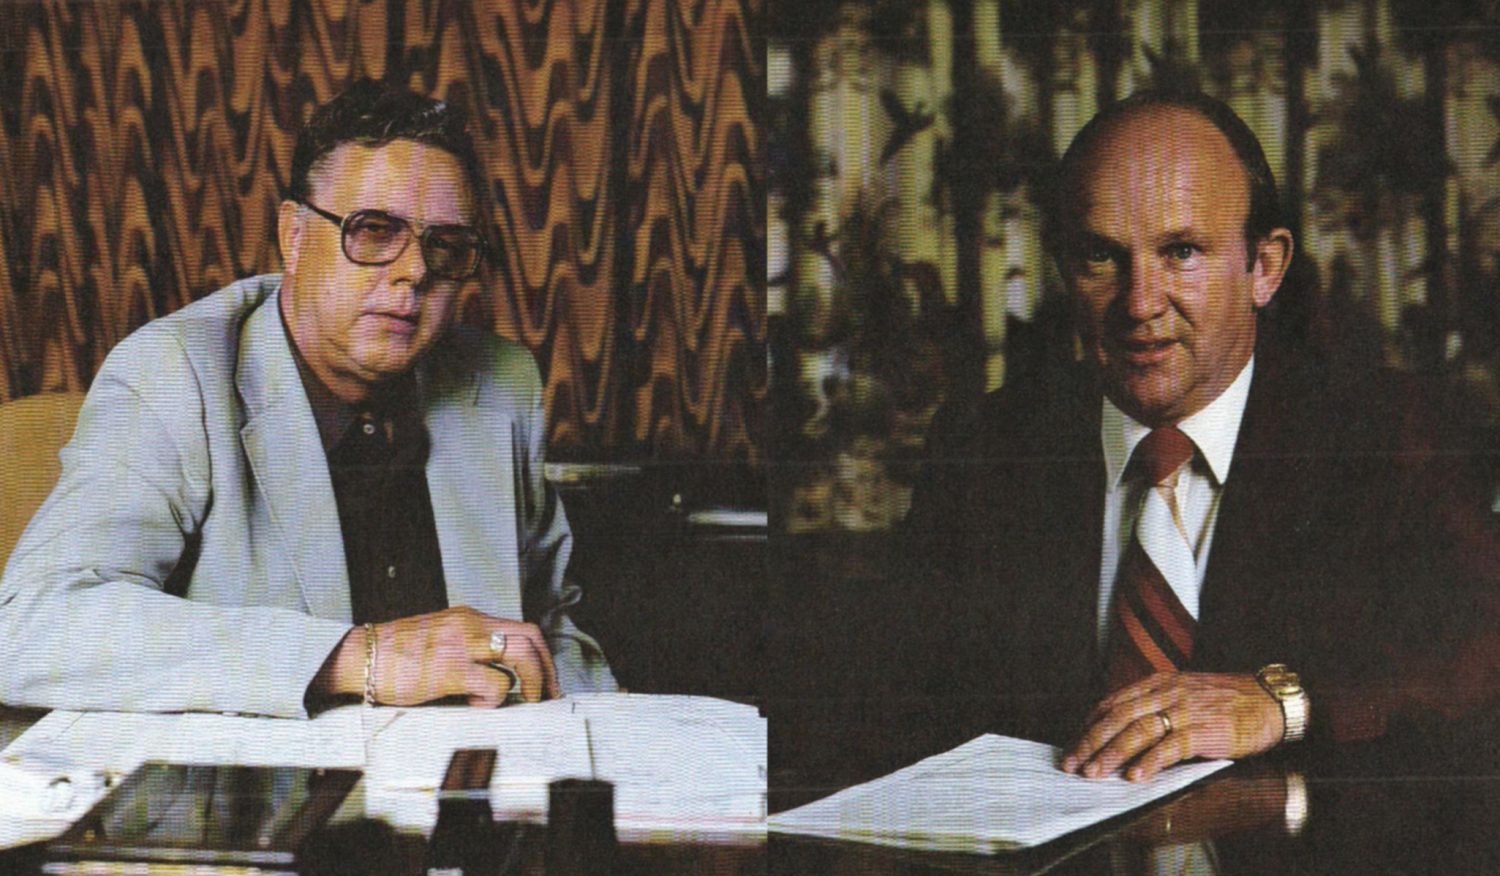 The Warner Von Holzen, left, and Floyd Hamus partnership lasted over two decades.